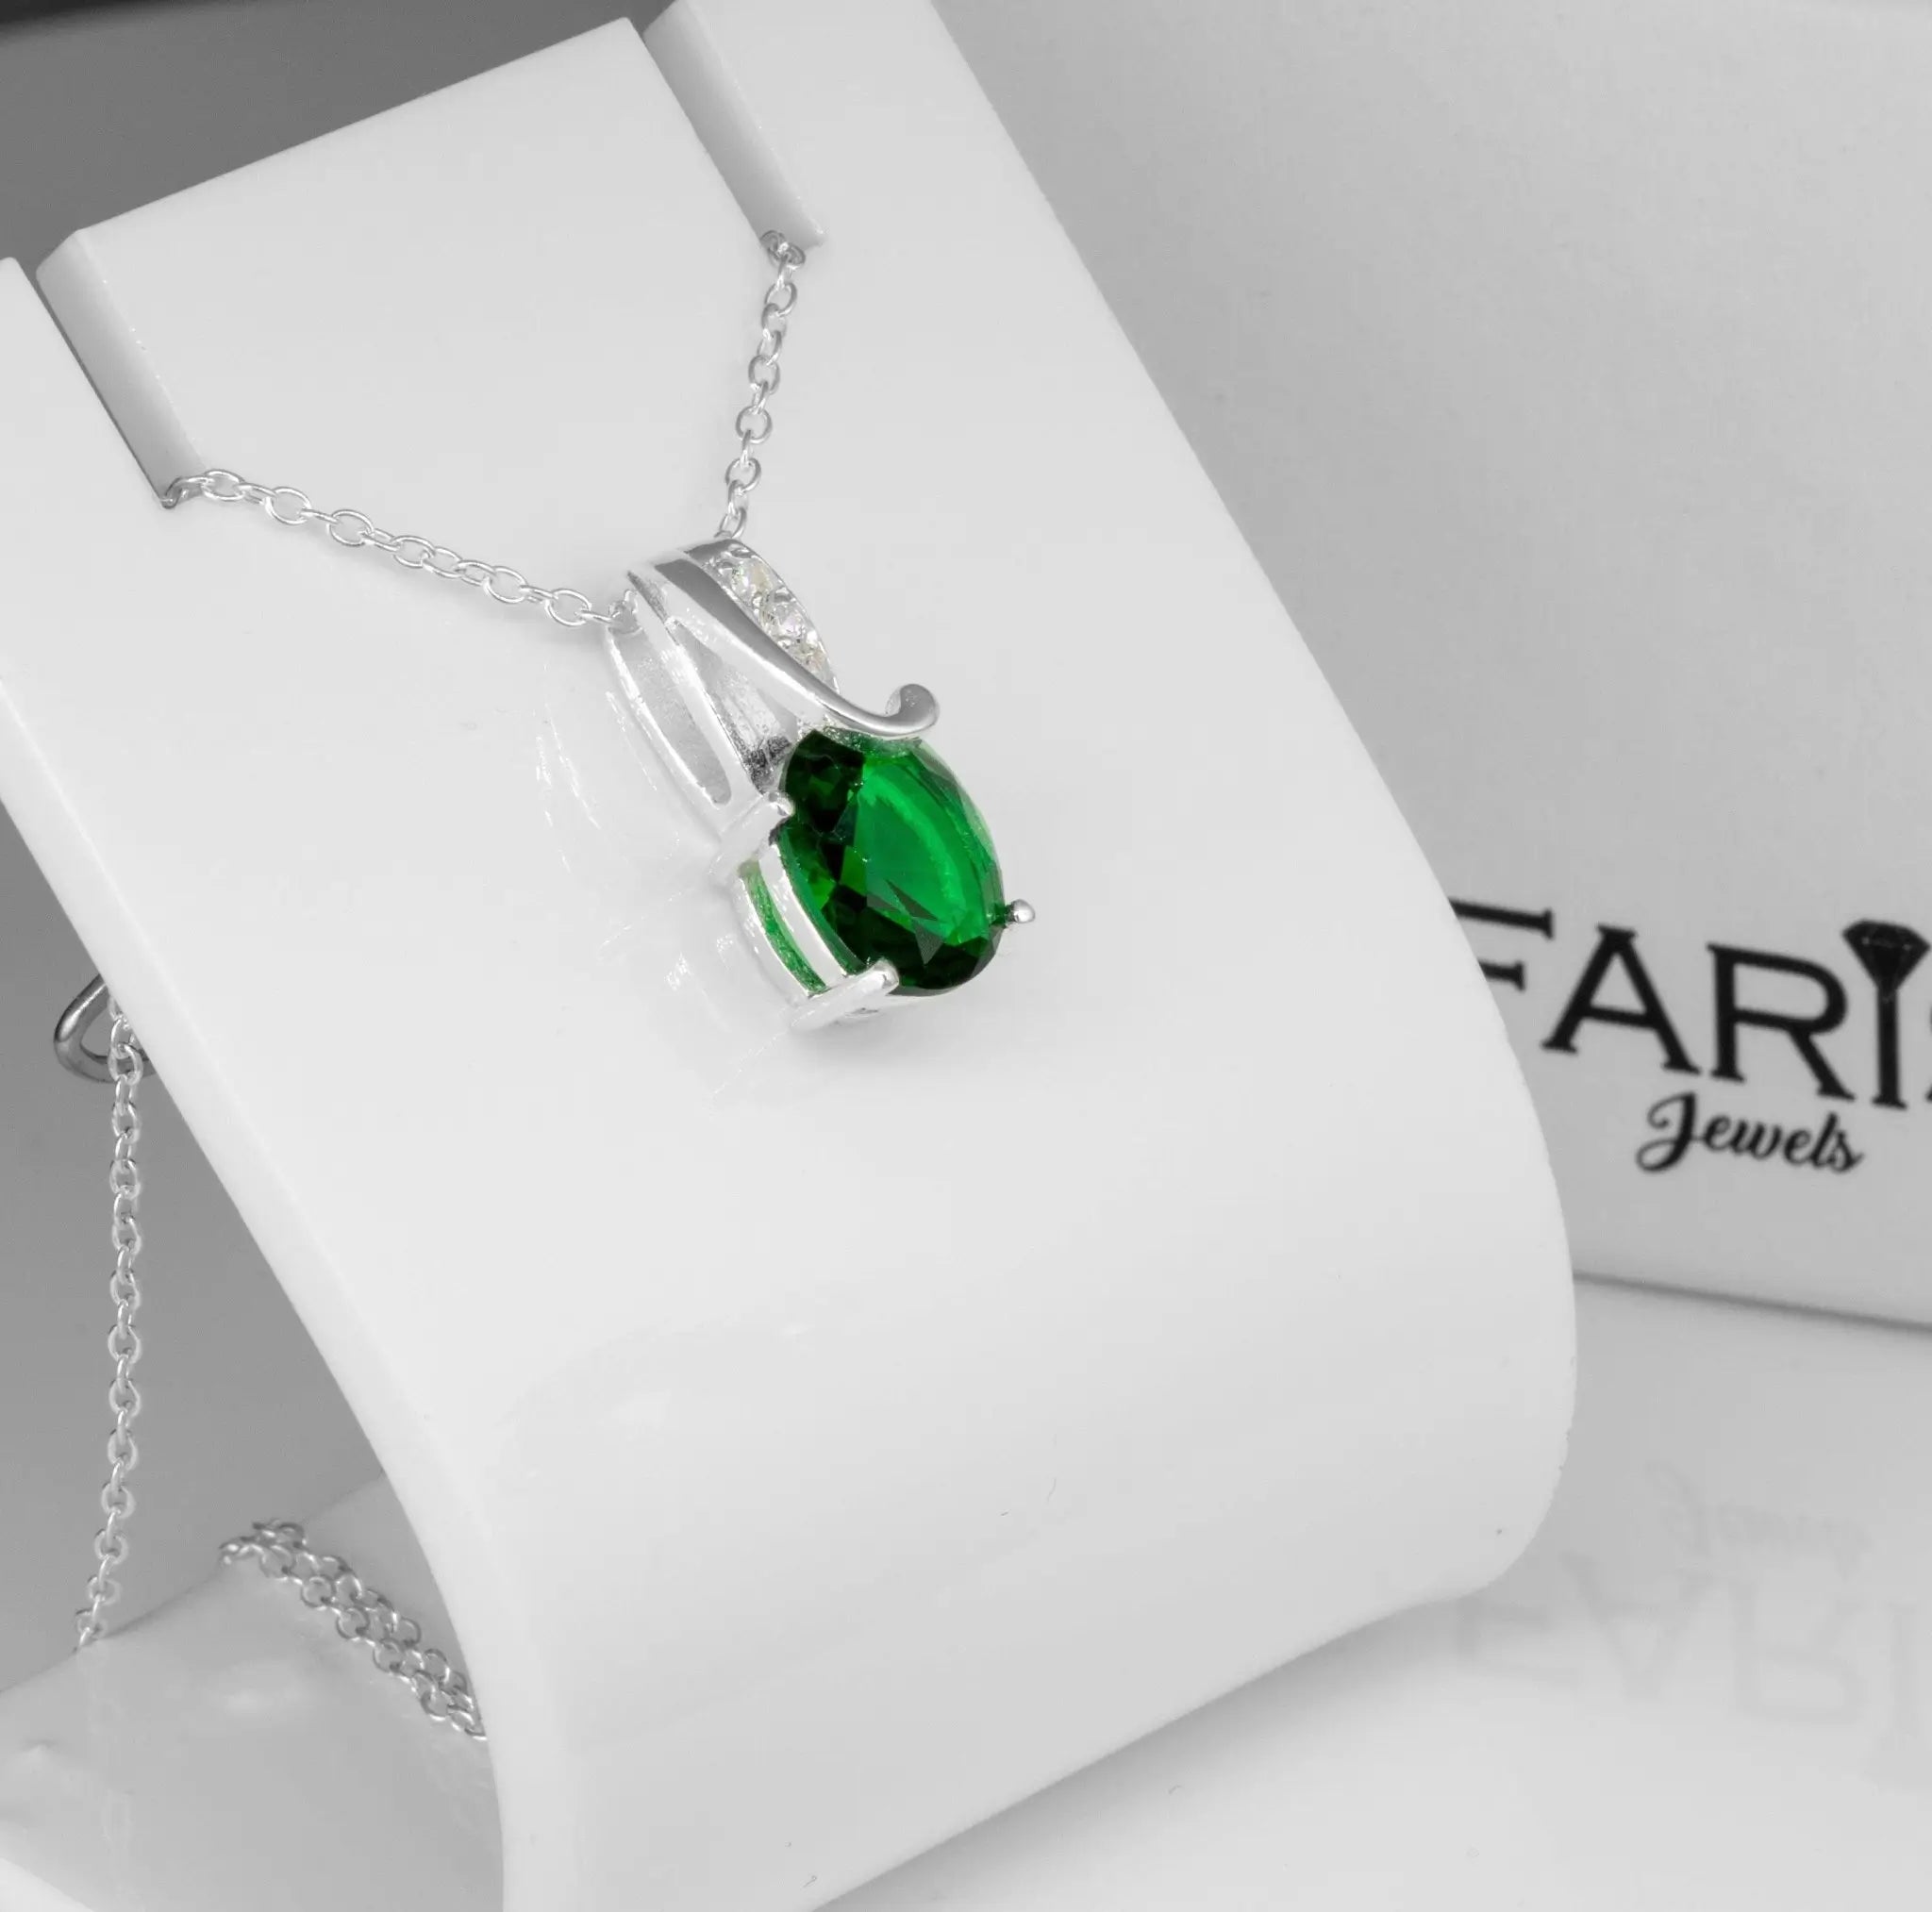 925 Sterling Silver Cubic Zirconia CZ & Green Emerald Ladies Pendant Necklace Jewellery Gift Boxed Man-made Diamond Gemstone Jewelry